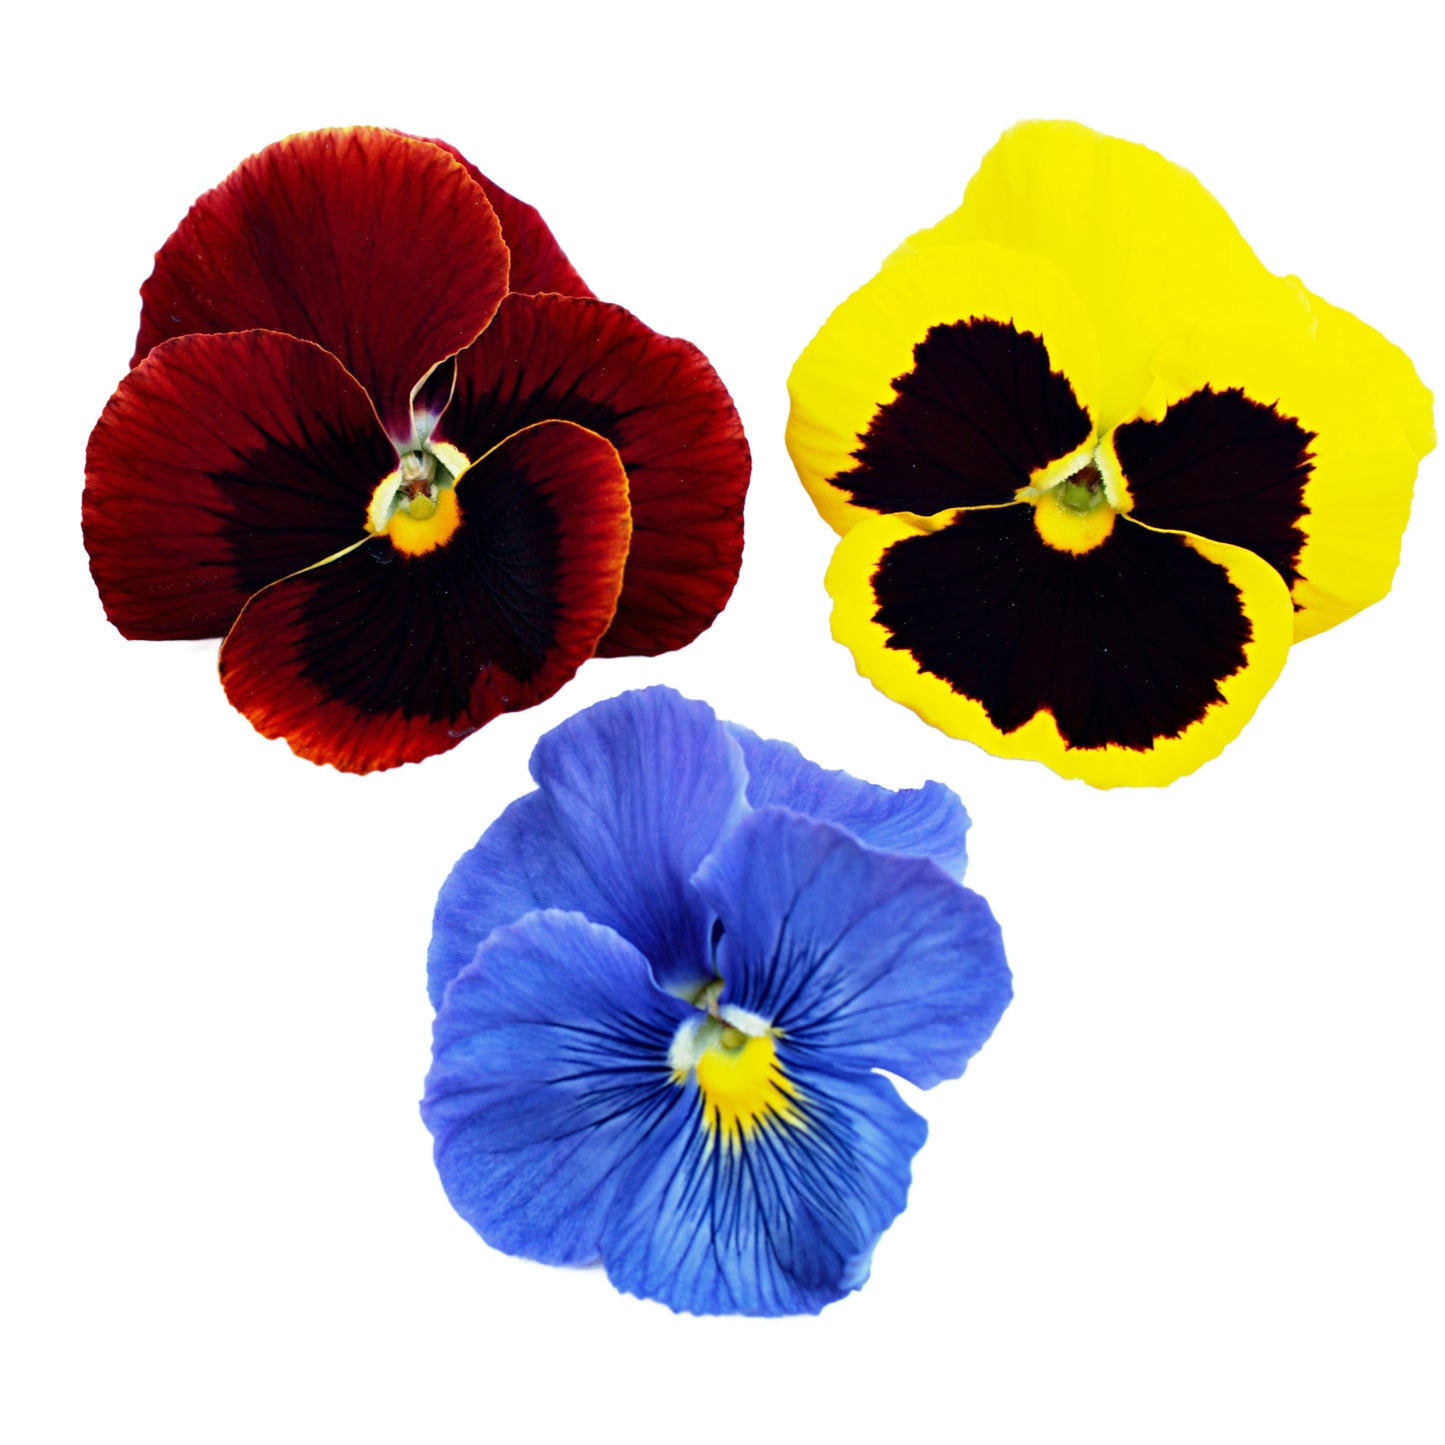 Pansy 'Delta Mix' - Full Plant Packs